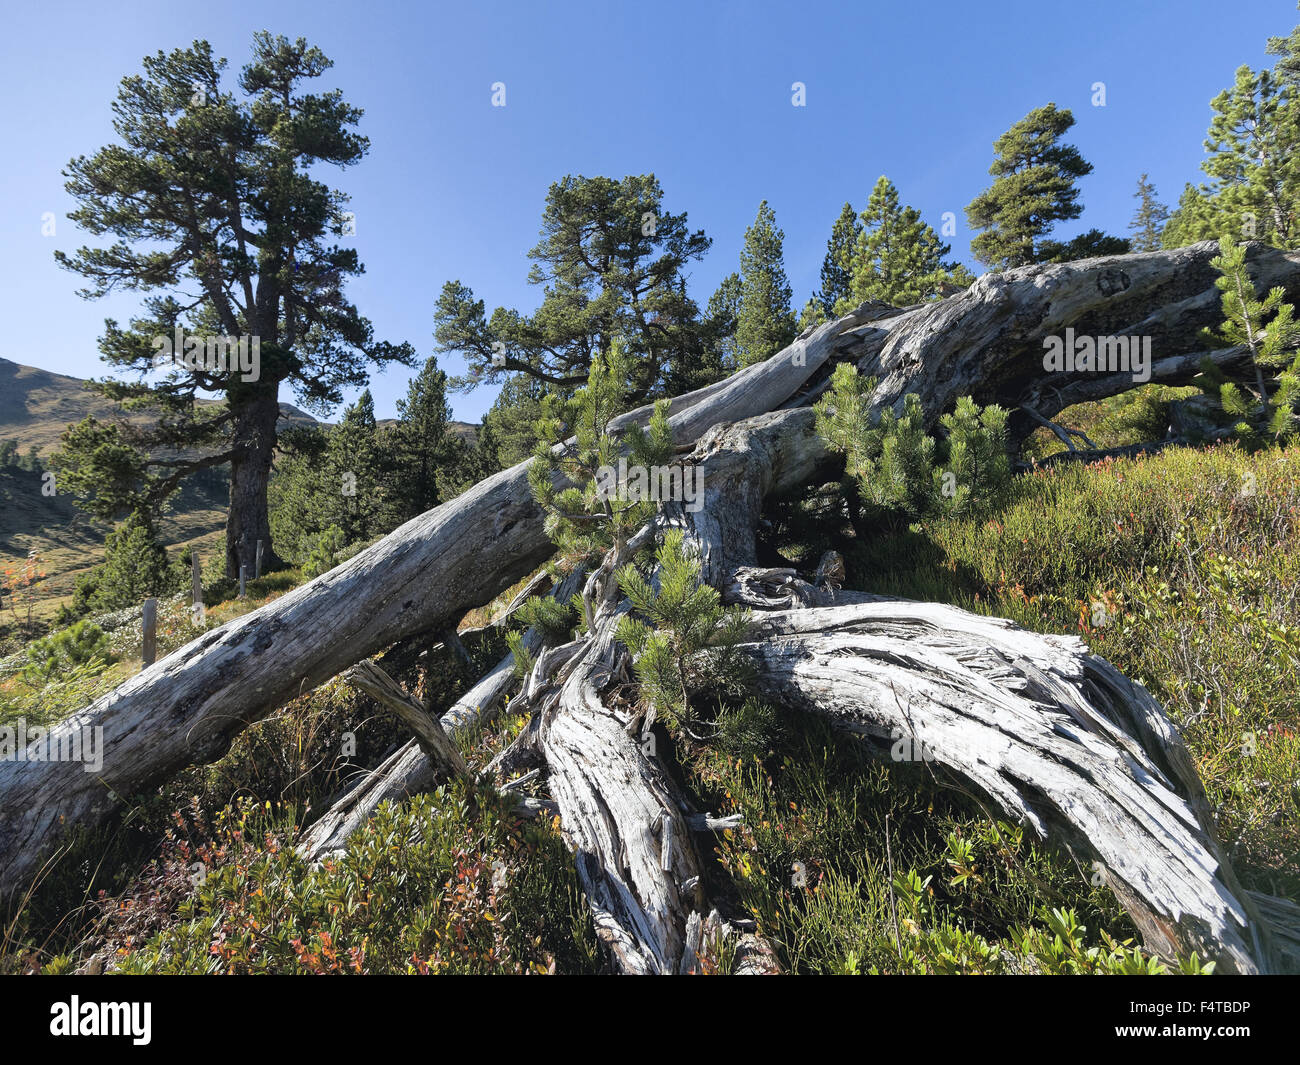 Pine wood with dead wood Stock Photo